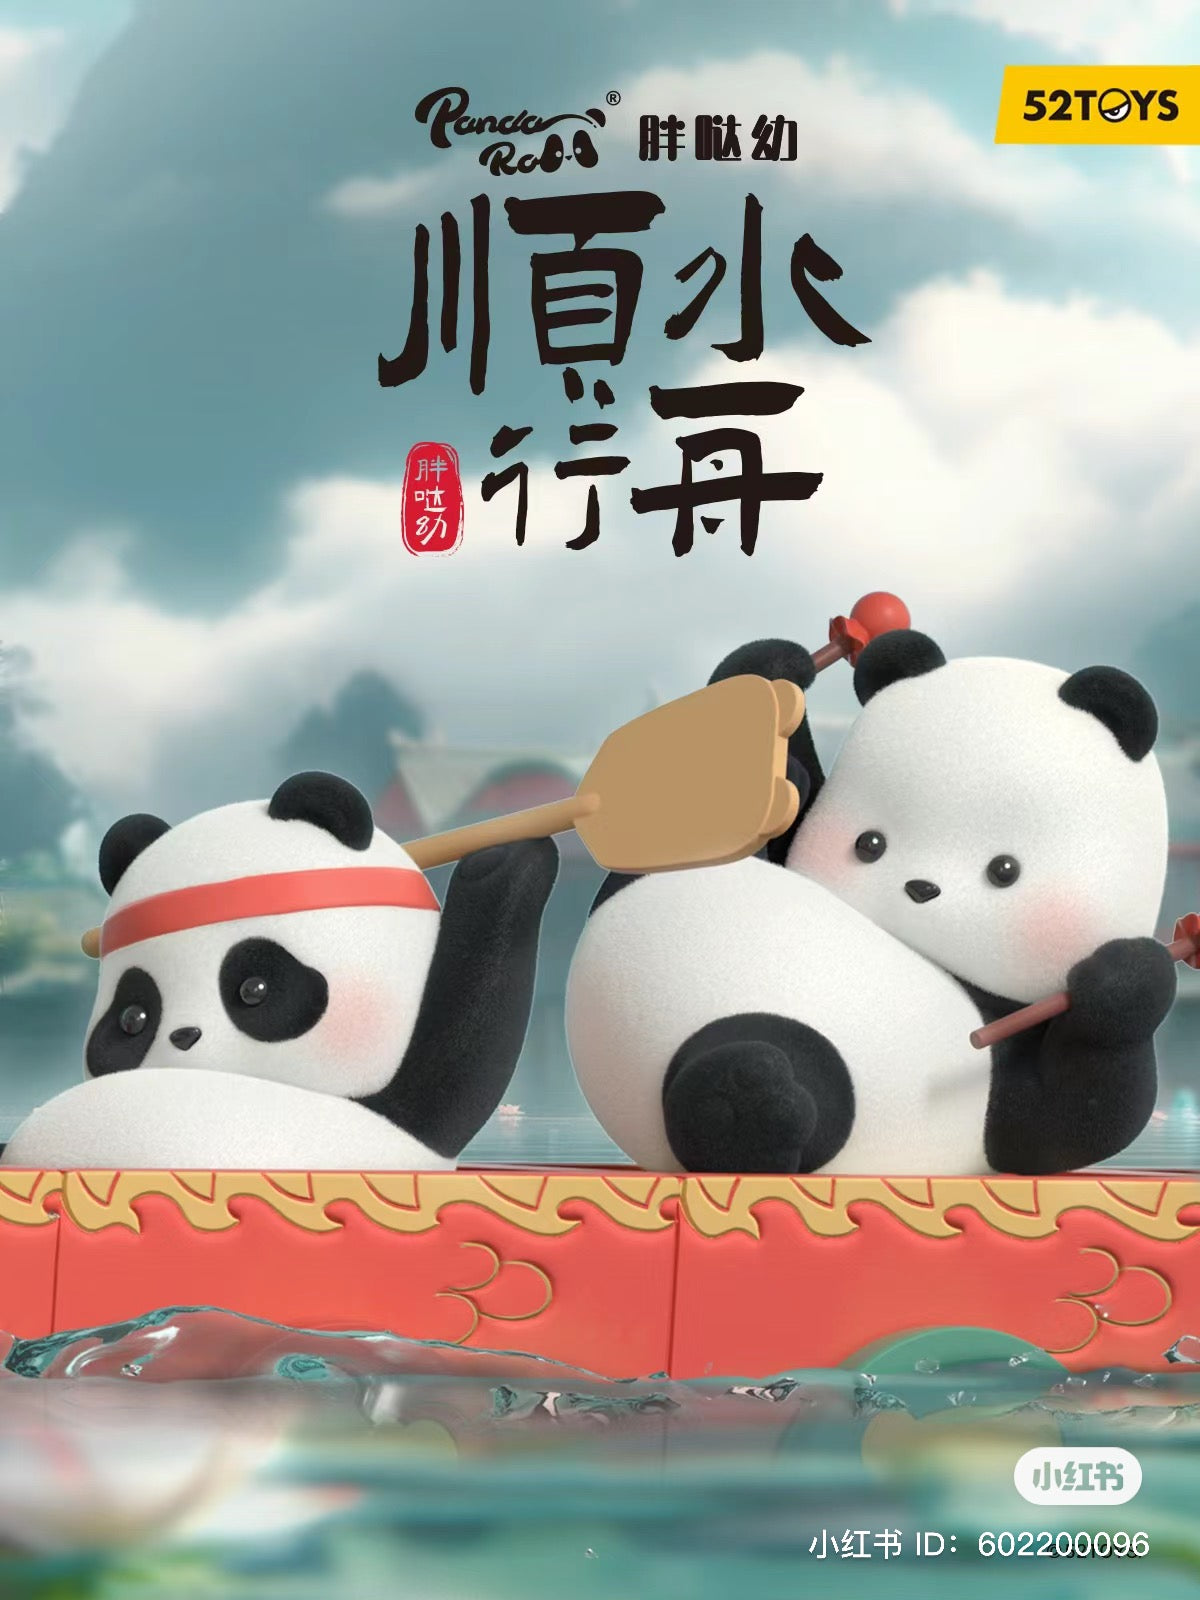 A blind box series from Strangecat Toys: Panda Roll - Row a Dragon Boat. Includes 4 regular designs and 2 secrets. Toy pandas on a boat, holding paddles.